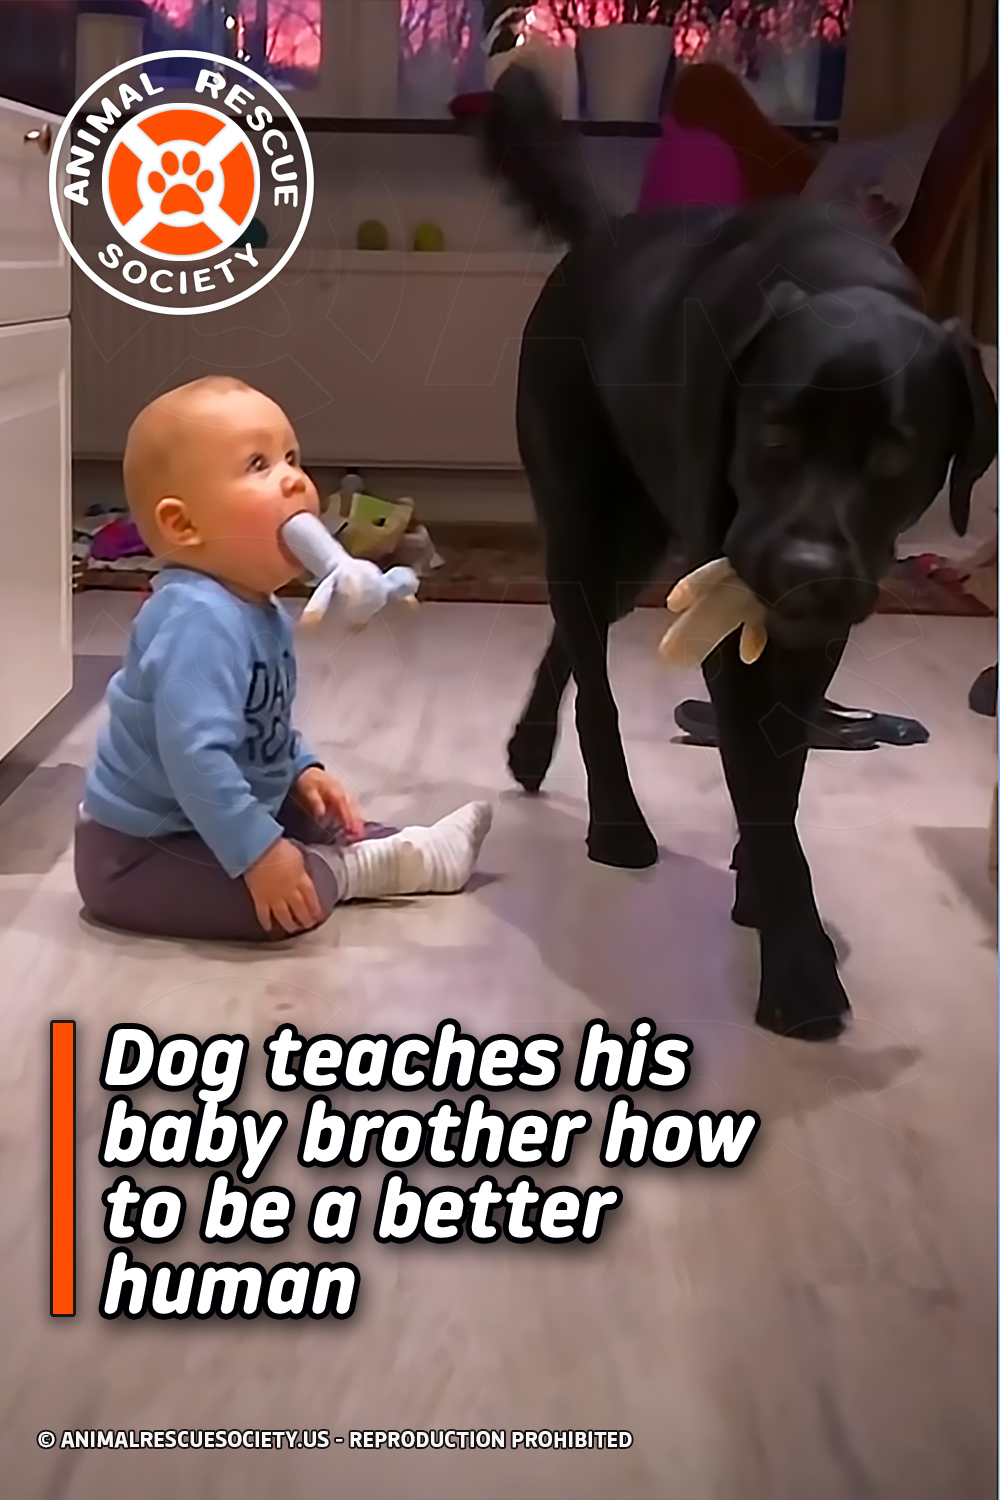 Dog teaches his baby brother how to be a better human